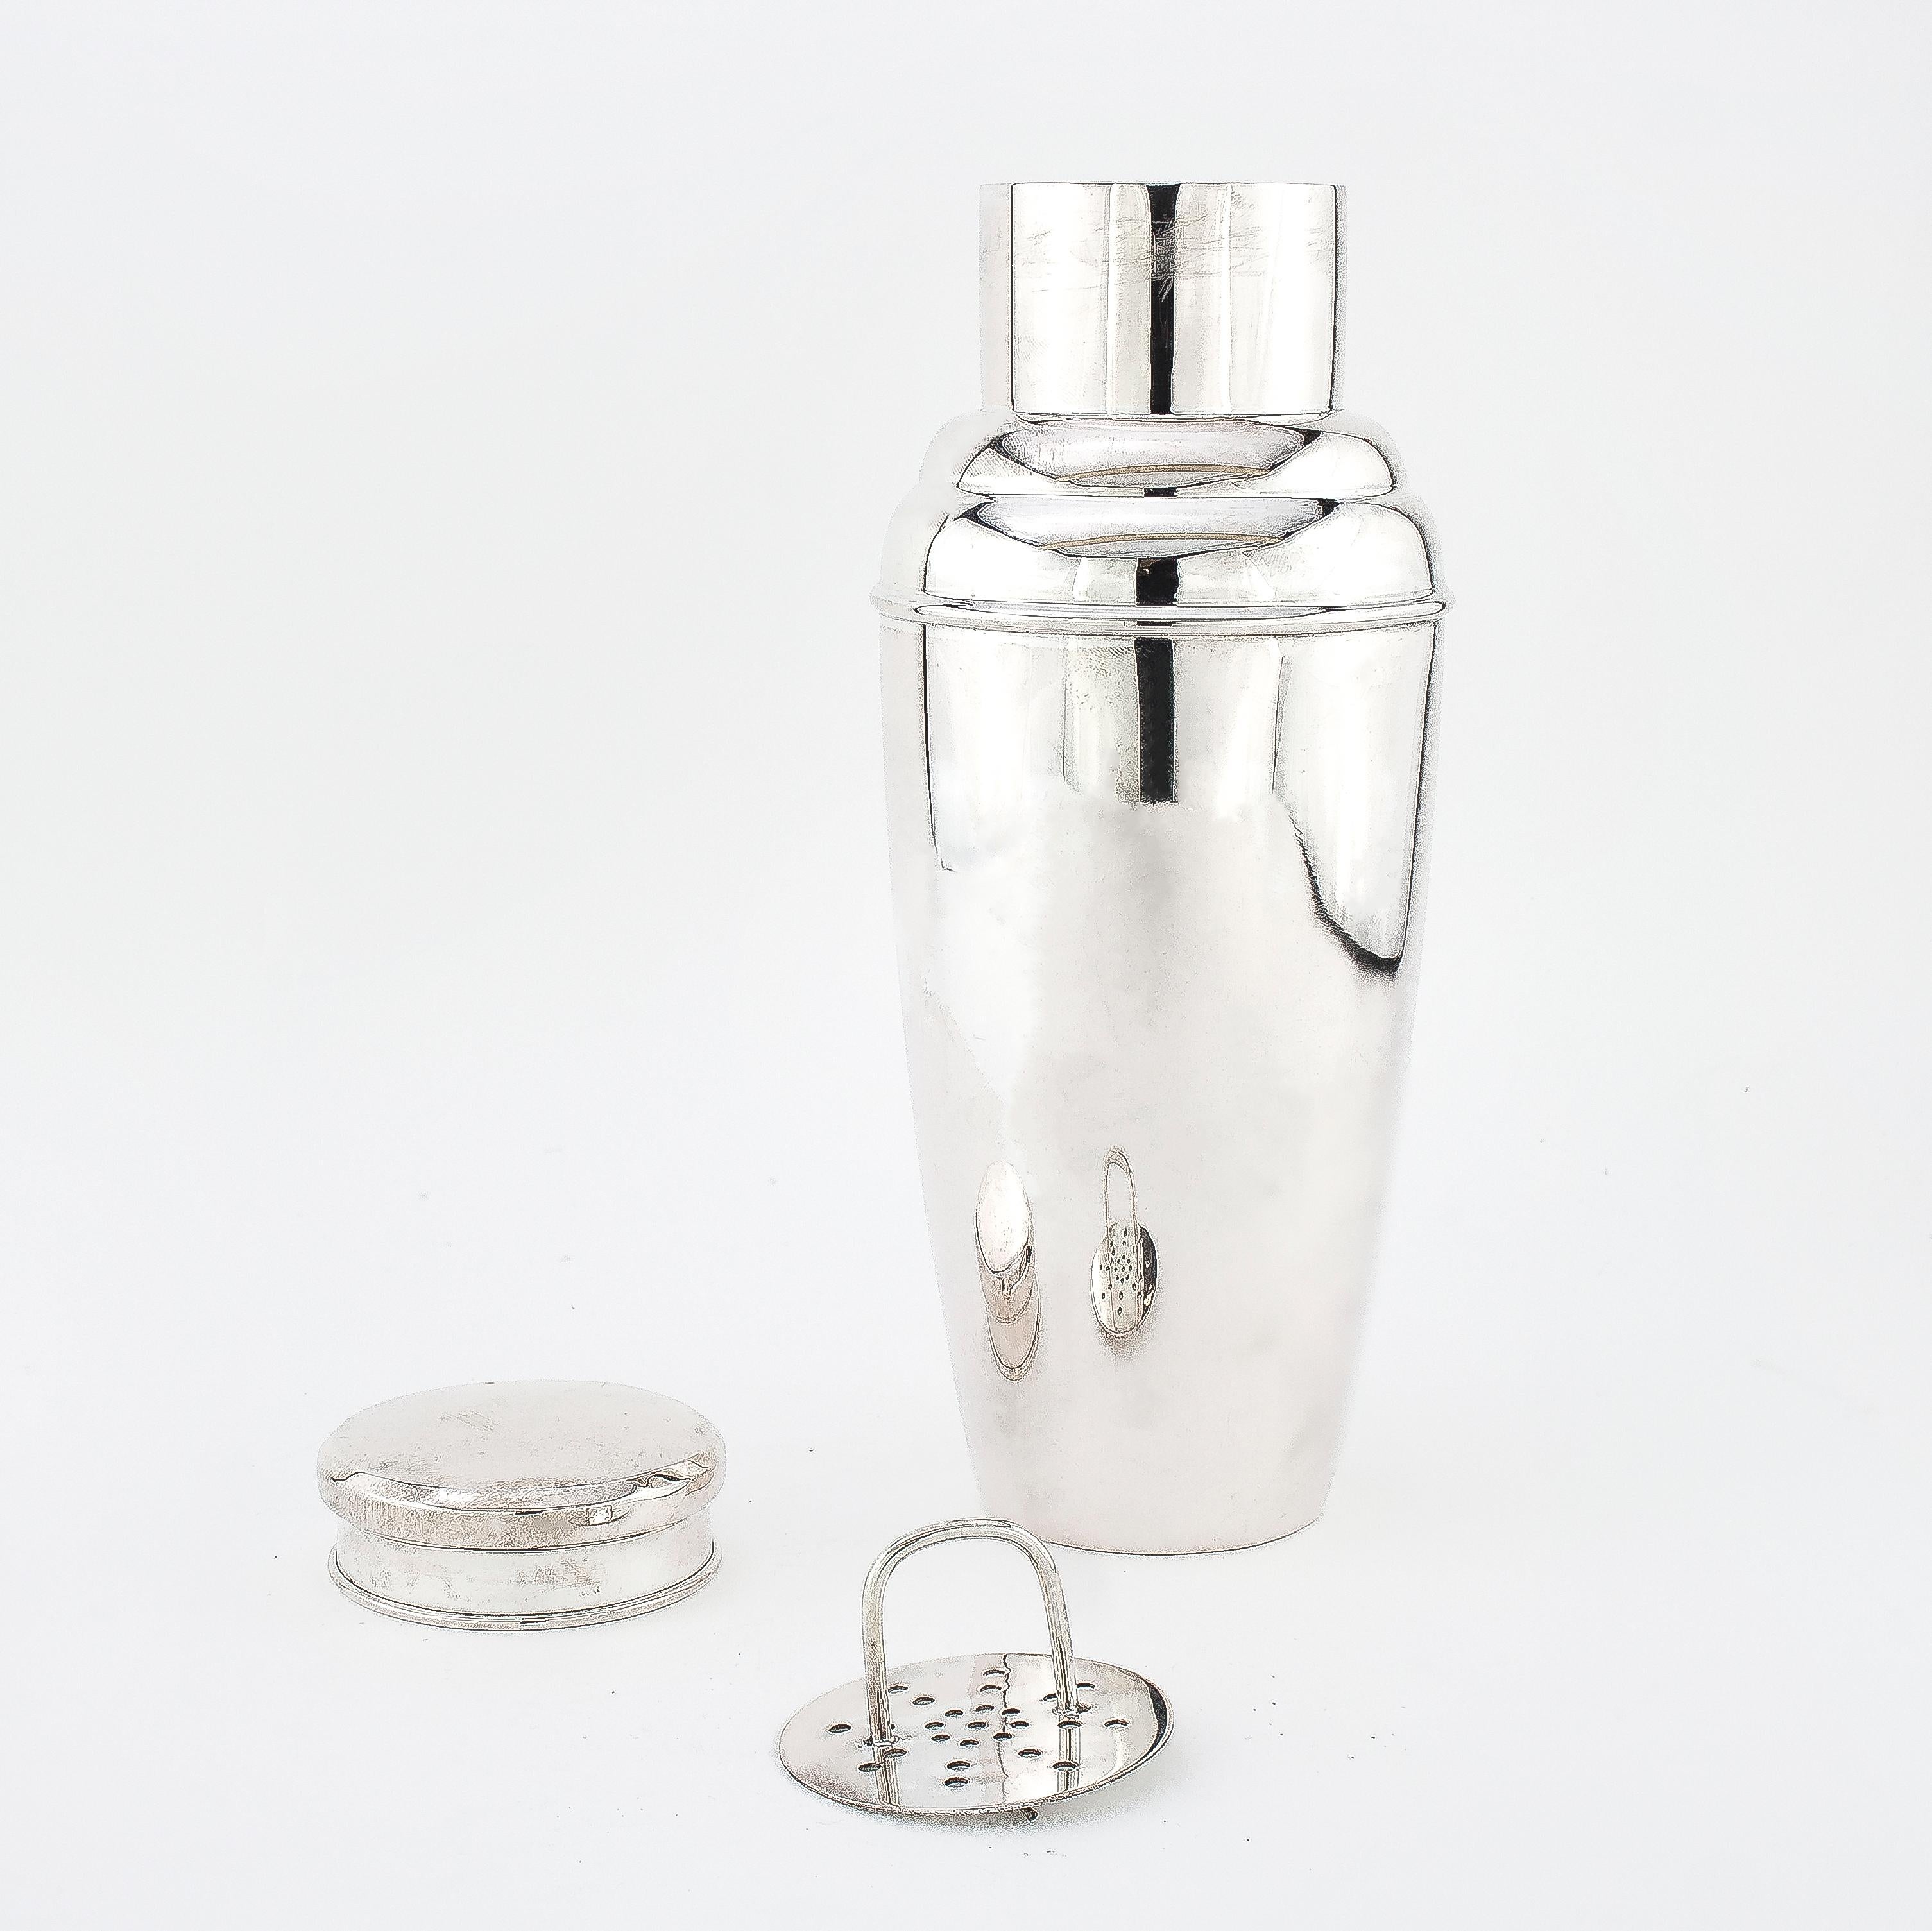 Silver cocktail shaker
Maker: Unknown
Possibly American,
circa 1950s

Dimensions: 
Diameter x height 9 x 21.5 cm
Weight: 354 grams

Condition report: Shaker has some surface wear and tear from general usage and some age wear, no damage,